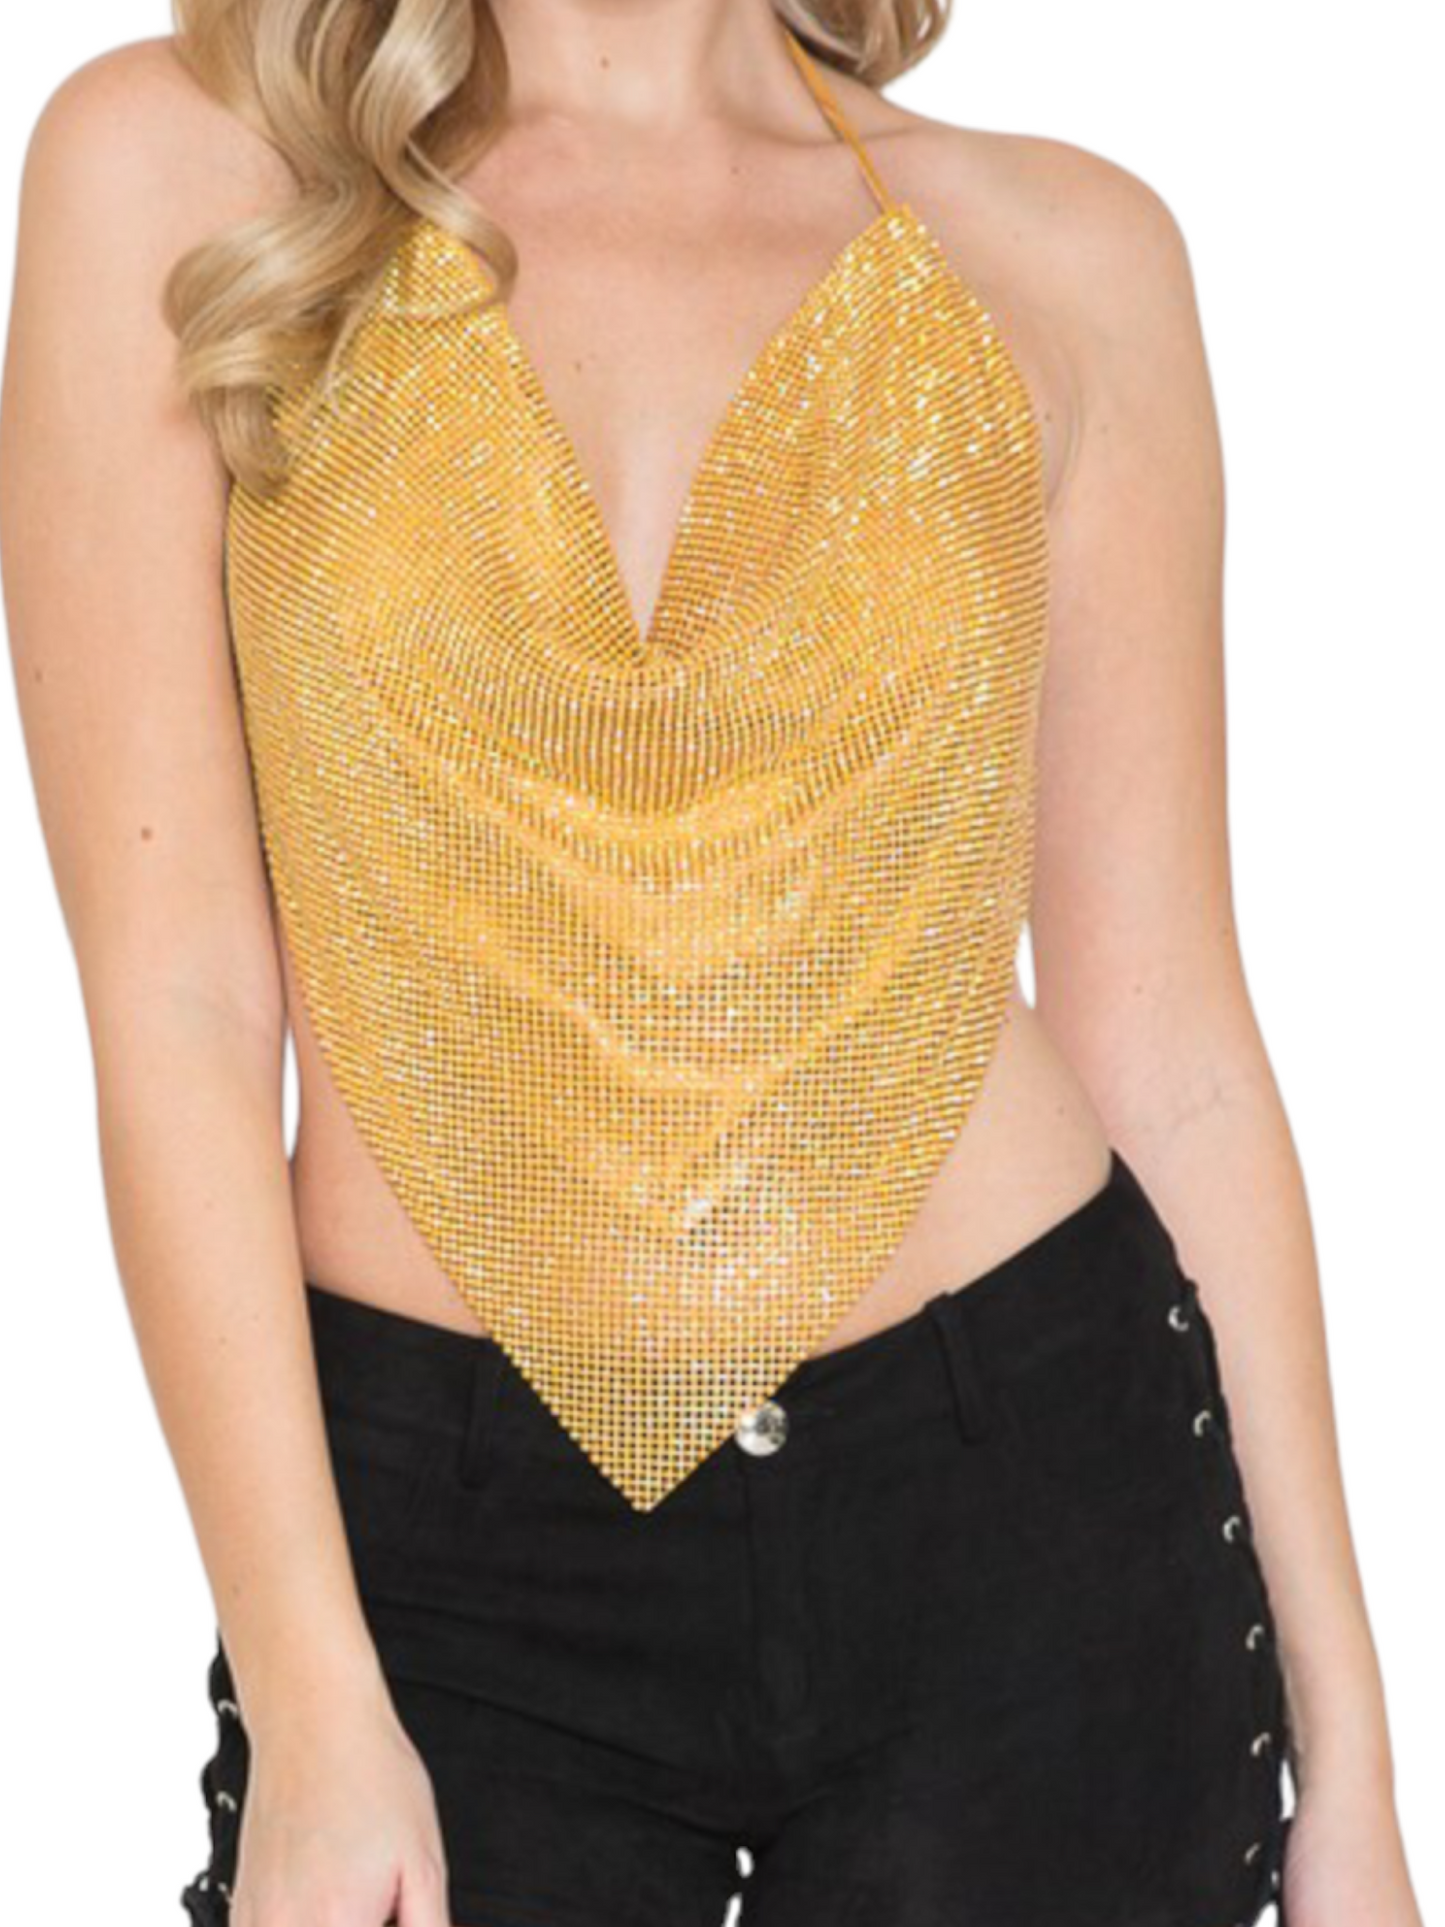 Shiny Halter Cropped Top